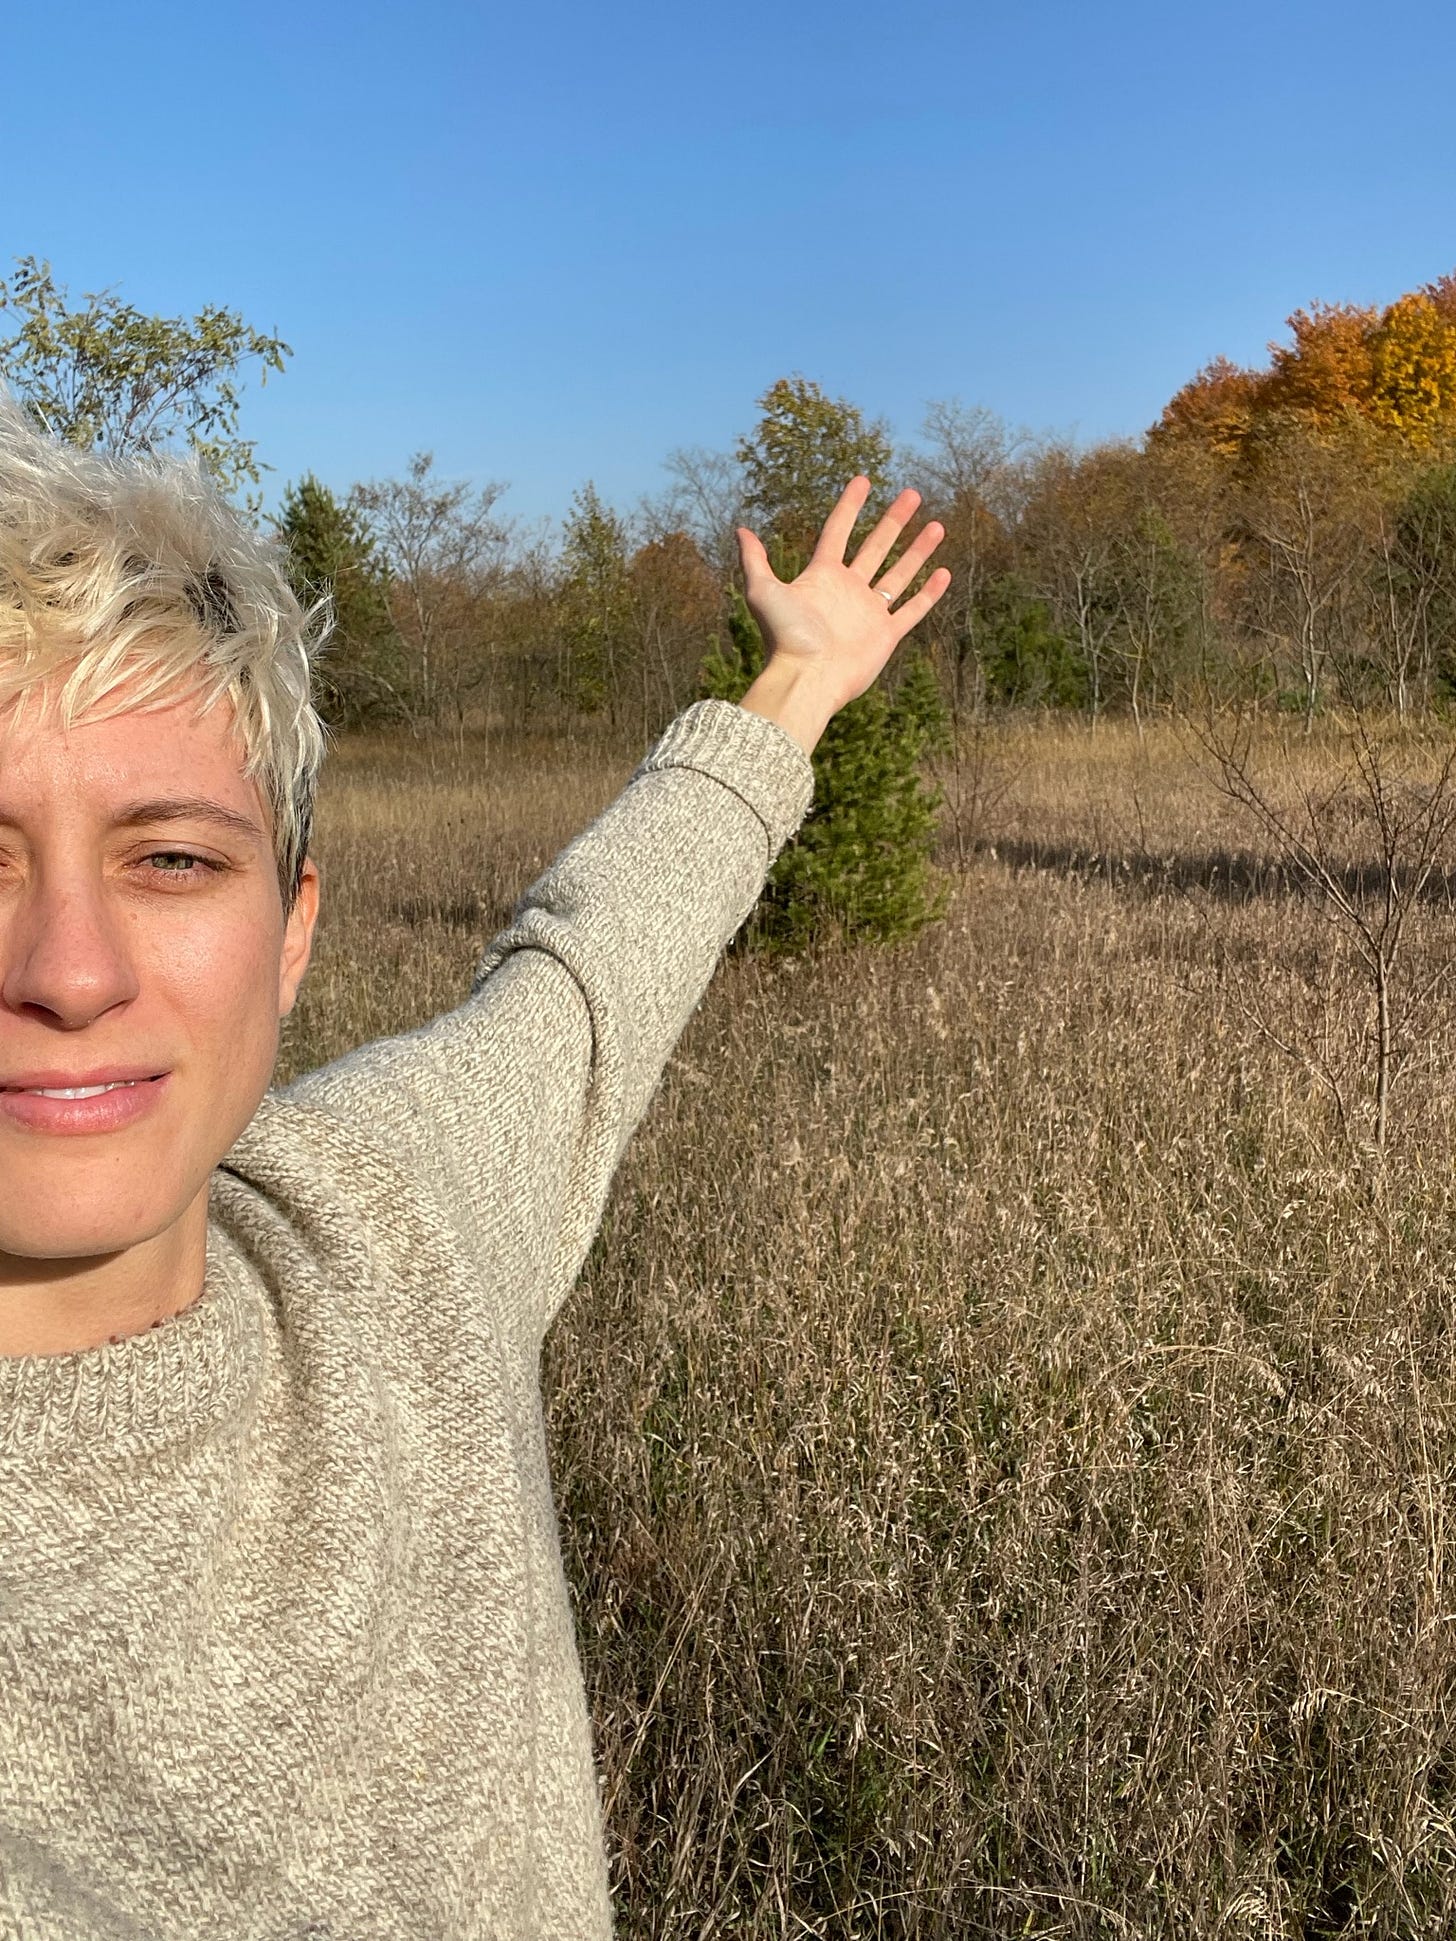 Elle smiling at camera with hand extended in front of fall foliage property.